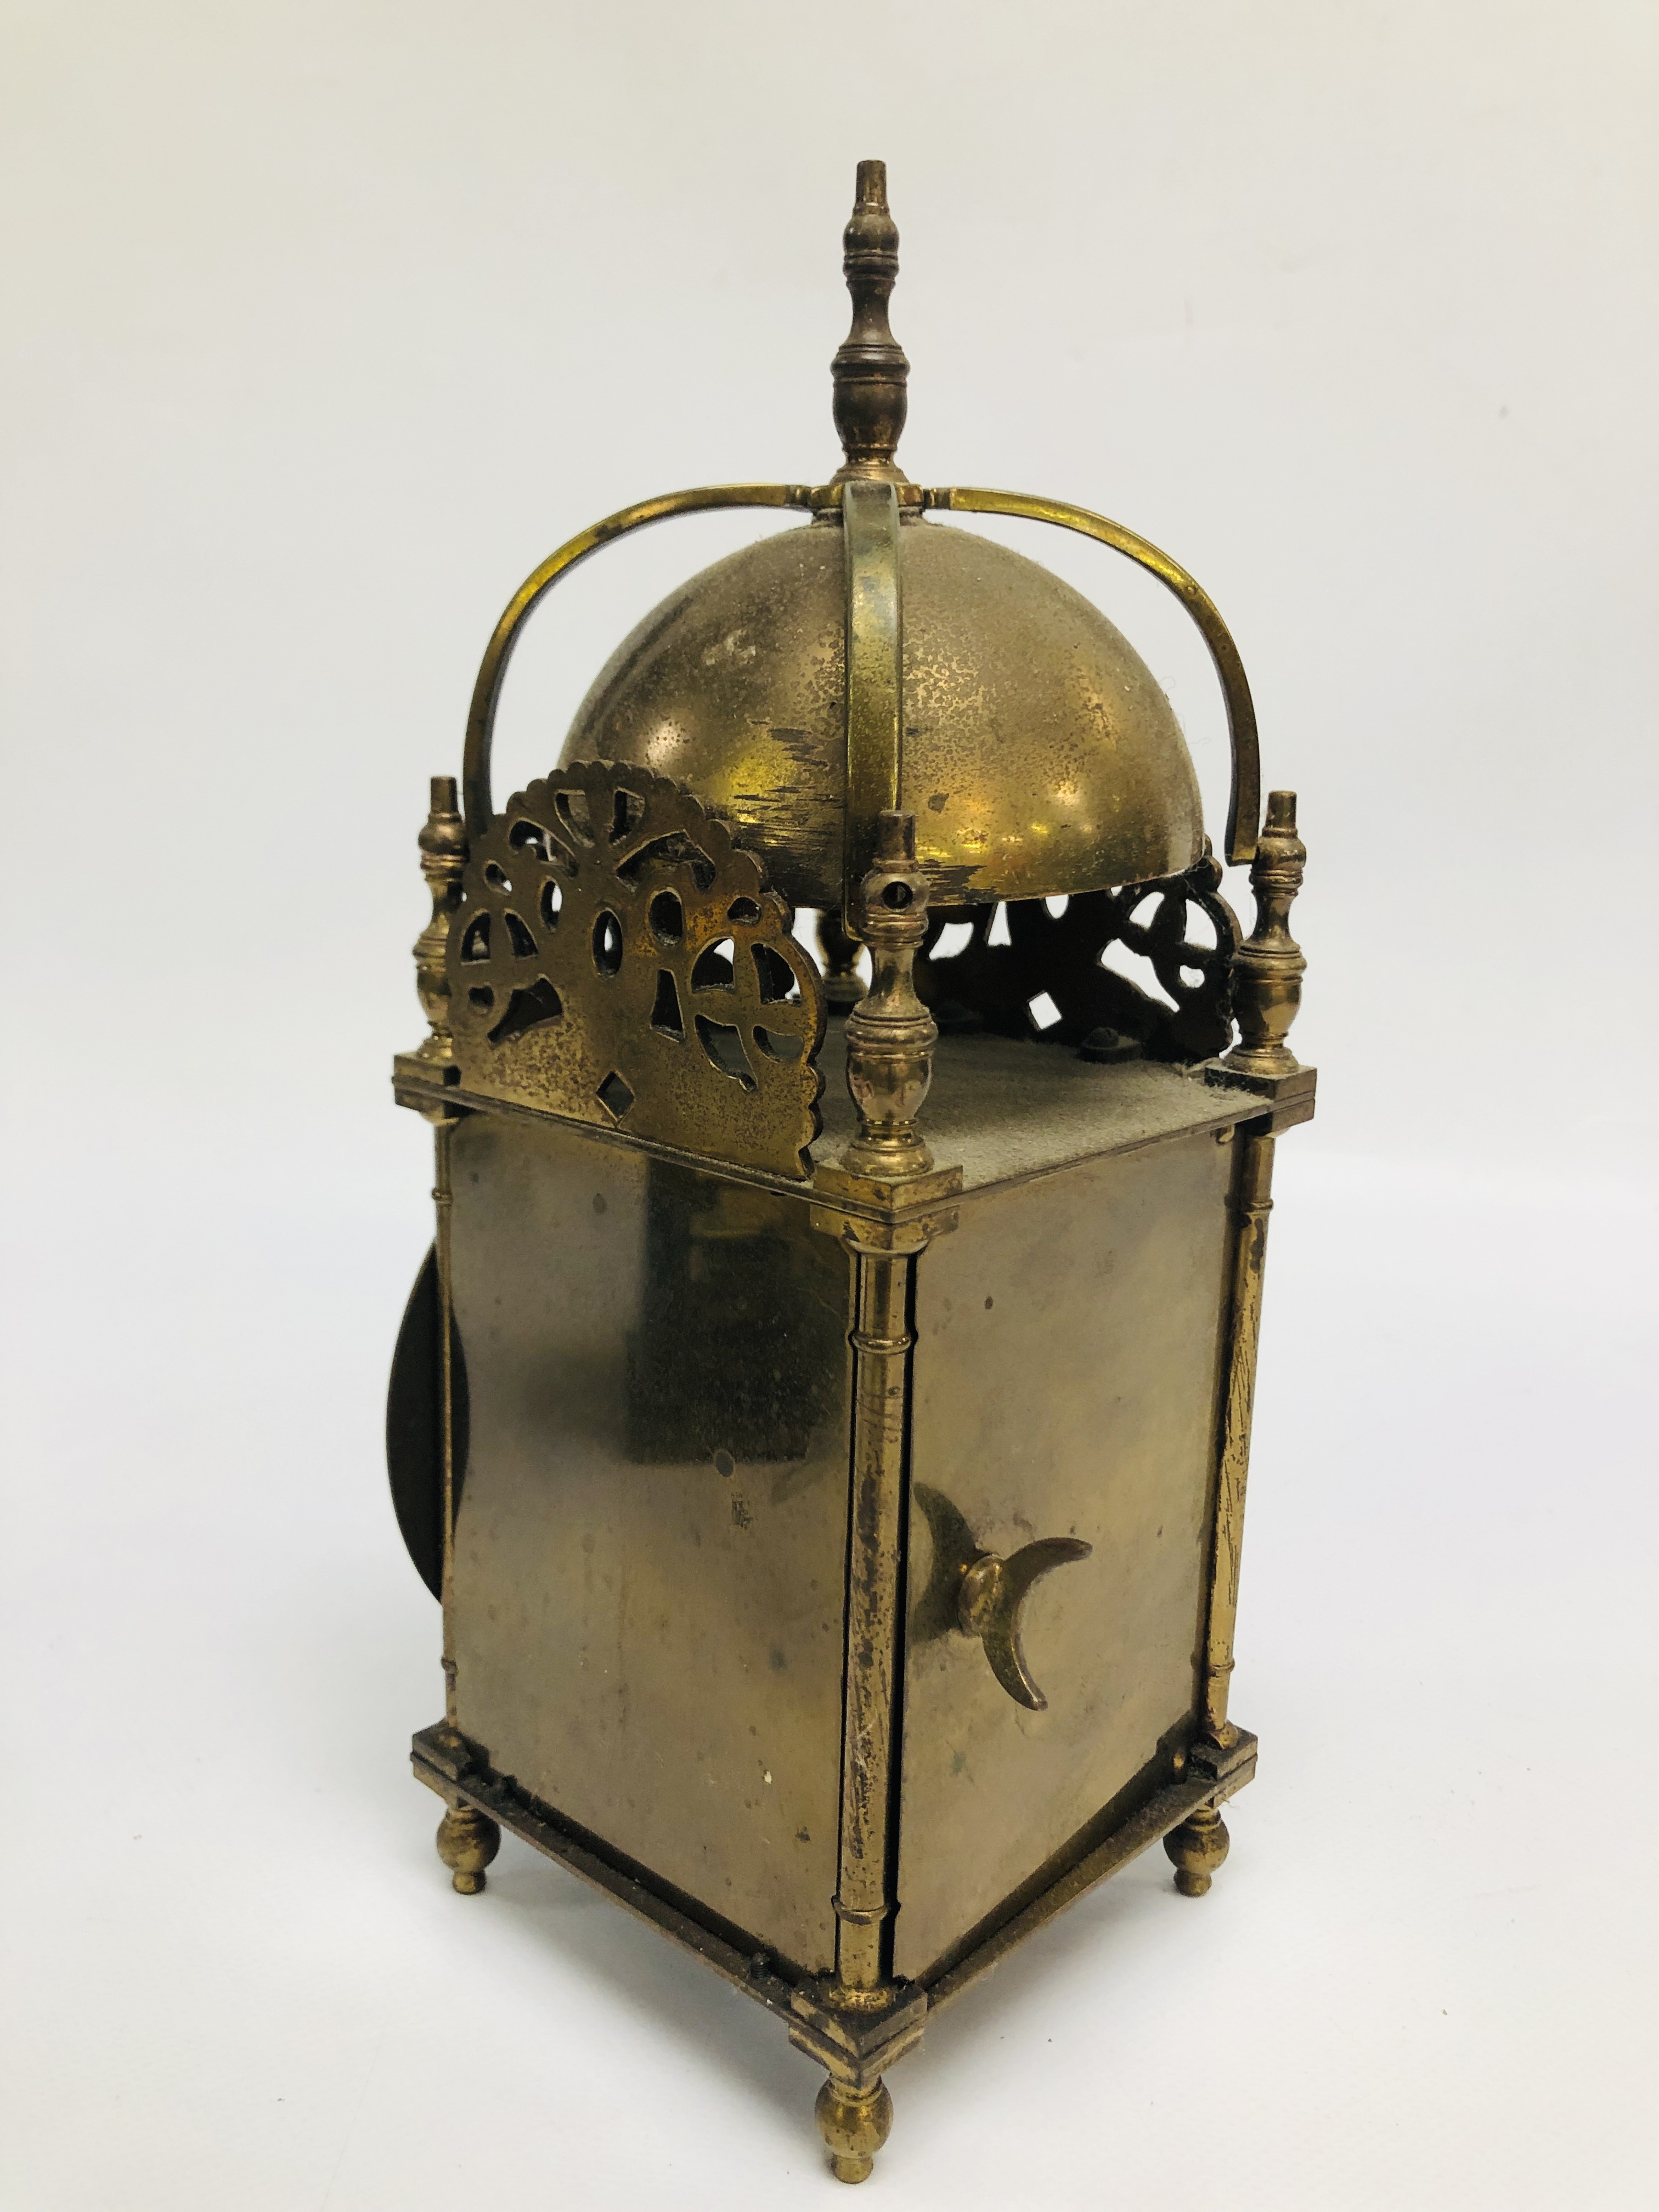 A FRENCH CARRIAGE CLOCK, THE FACE BEING PLASTIC + A MANTEL CLOCK OF LANTERN FORM. - Image 10 of 12